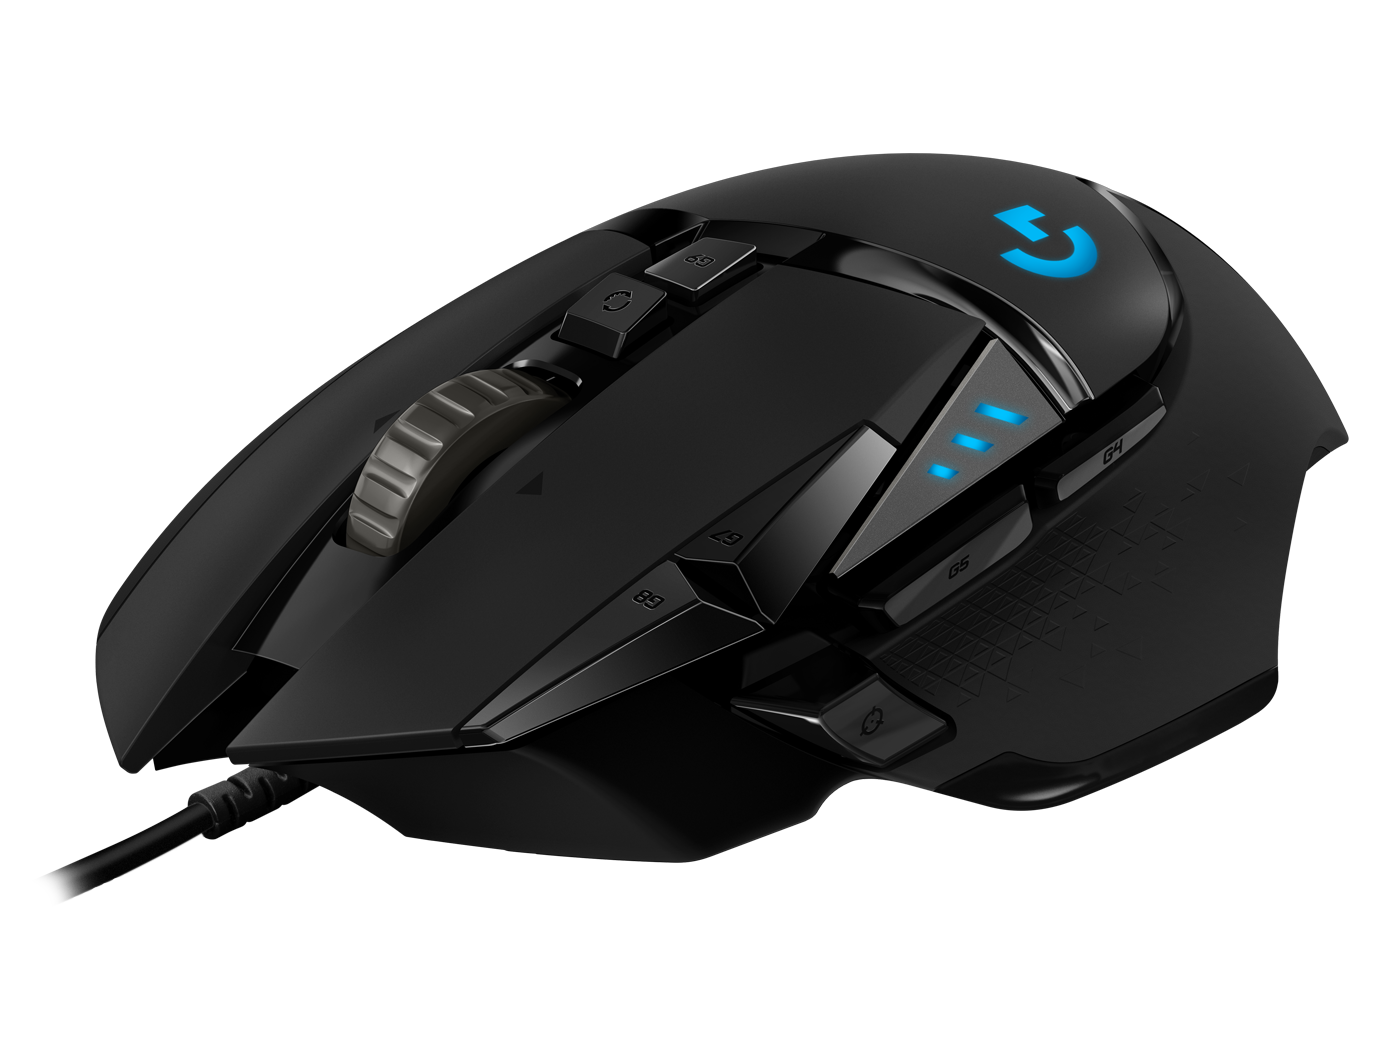 How to Install Logitech Mouse G502 Hero Software on Ubuntu 20.04 - Featured